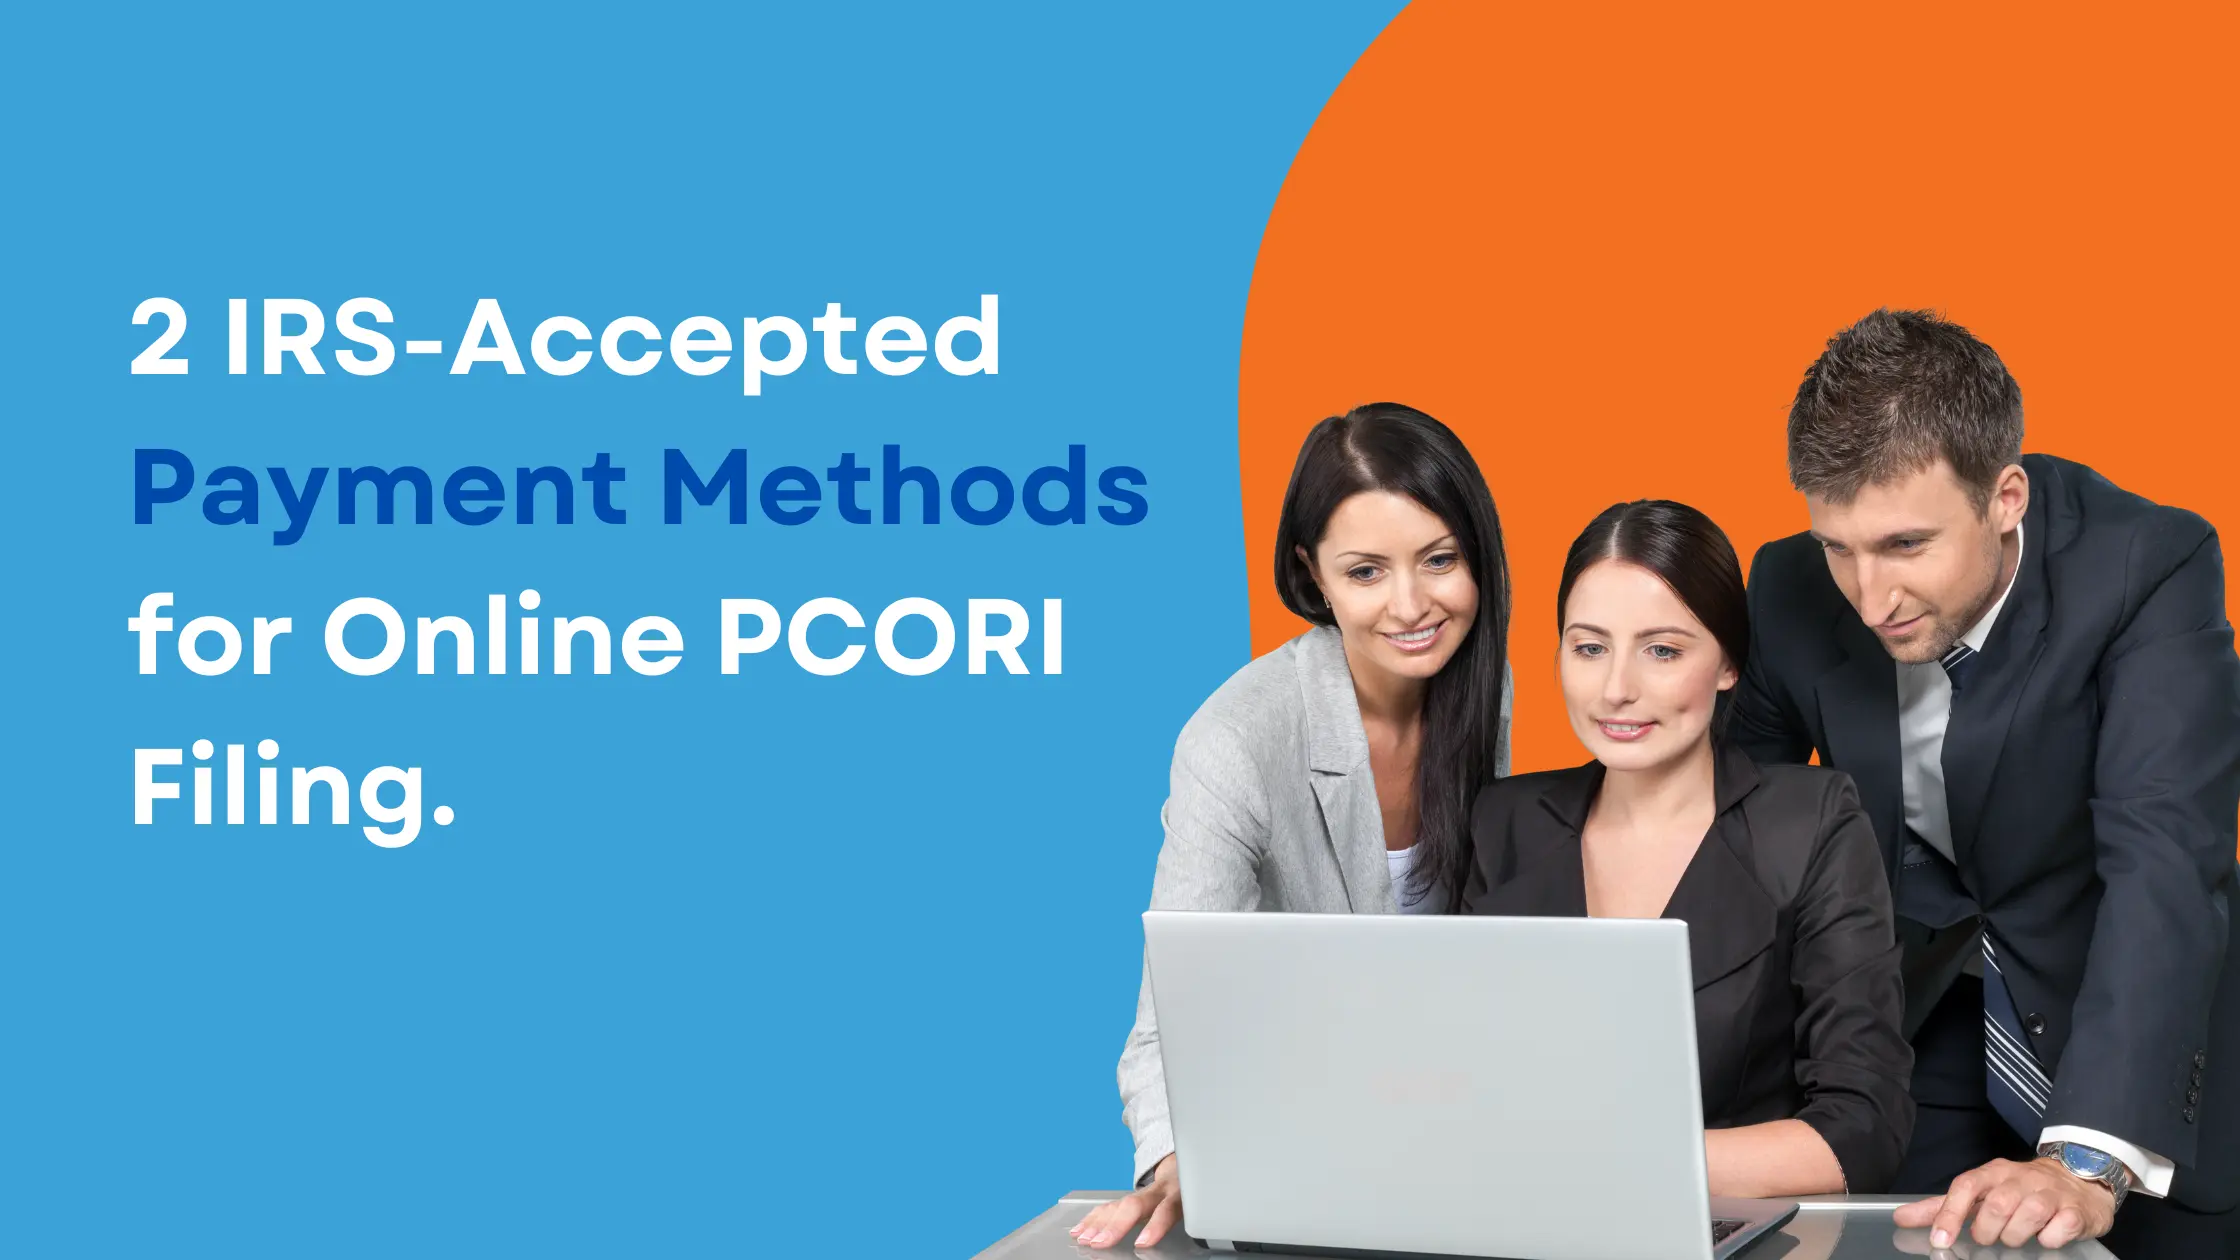 2 IRS-Accepted Payment Methods for Online PCORI Filing